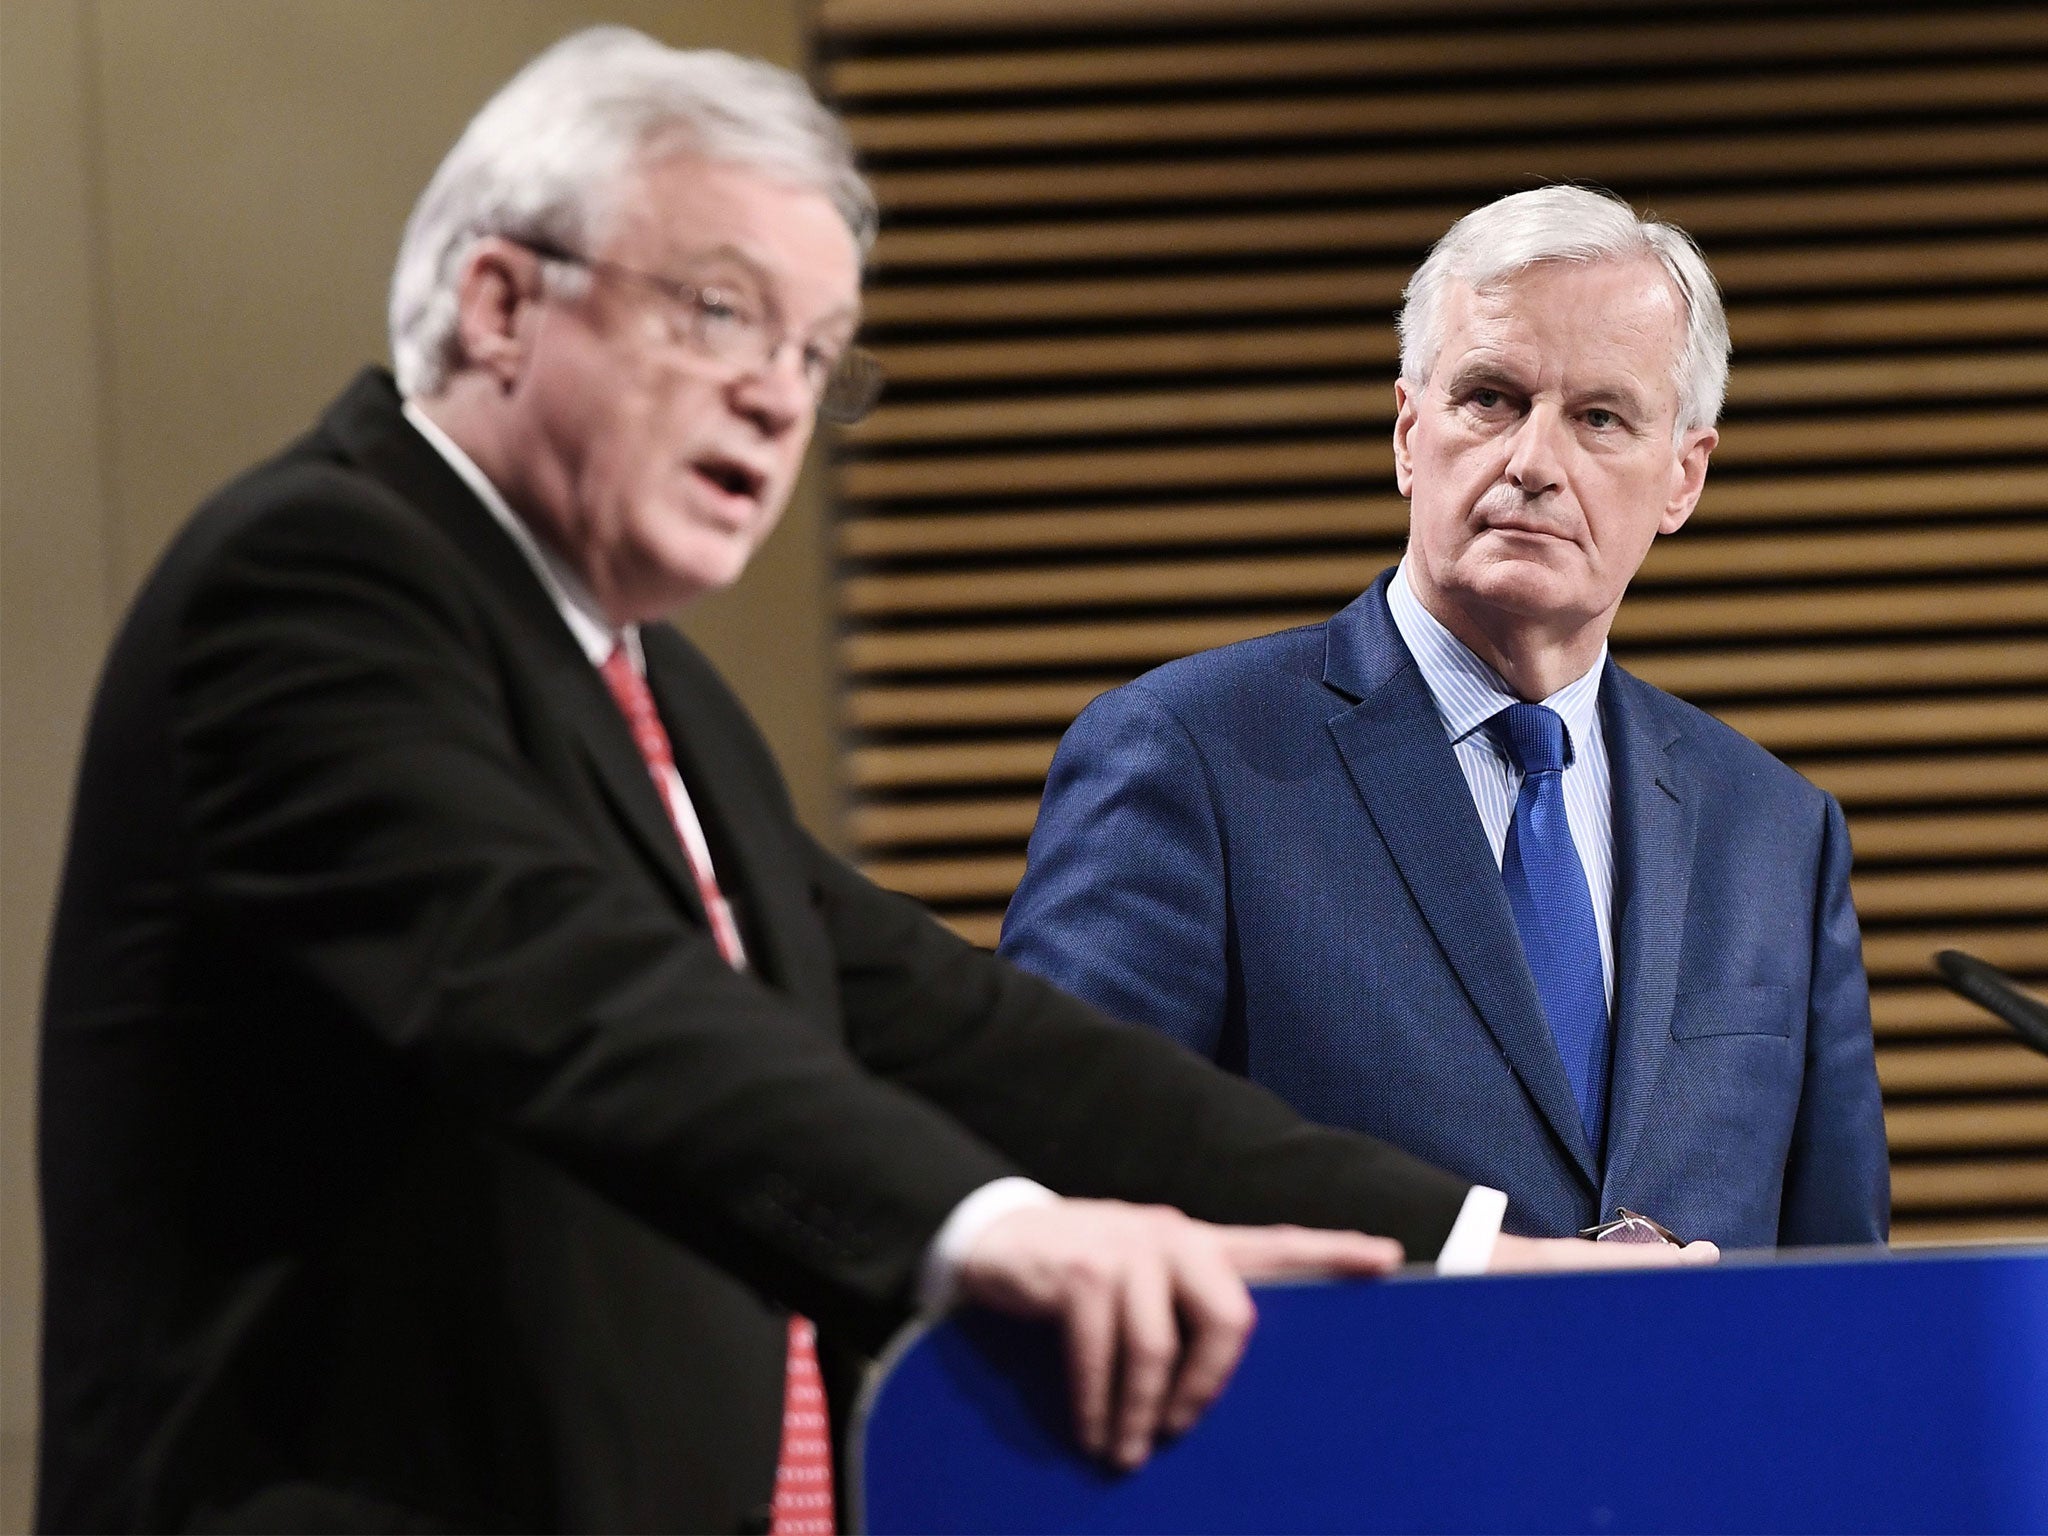 David Davis’s predictions have been drastically wrong before – do we really want to put our faith in him now?